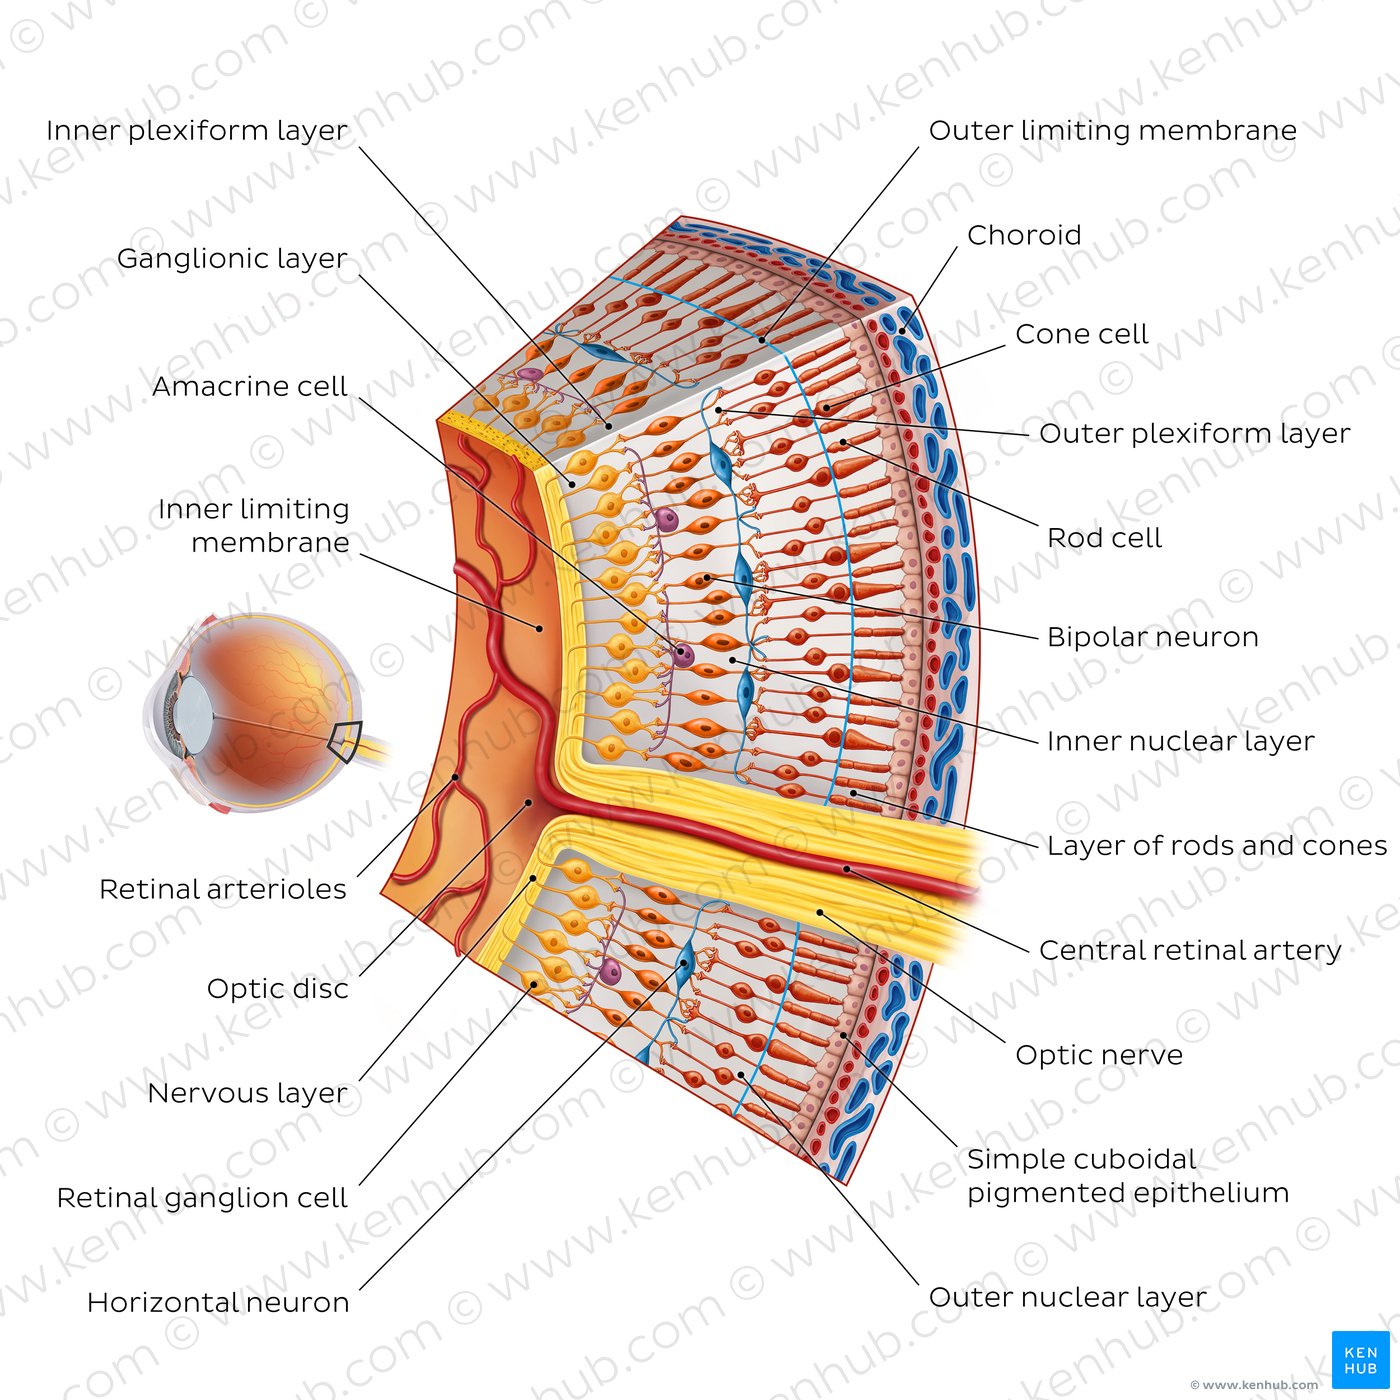 Cells and layers of the retina (coronal view)